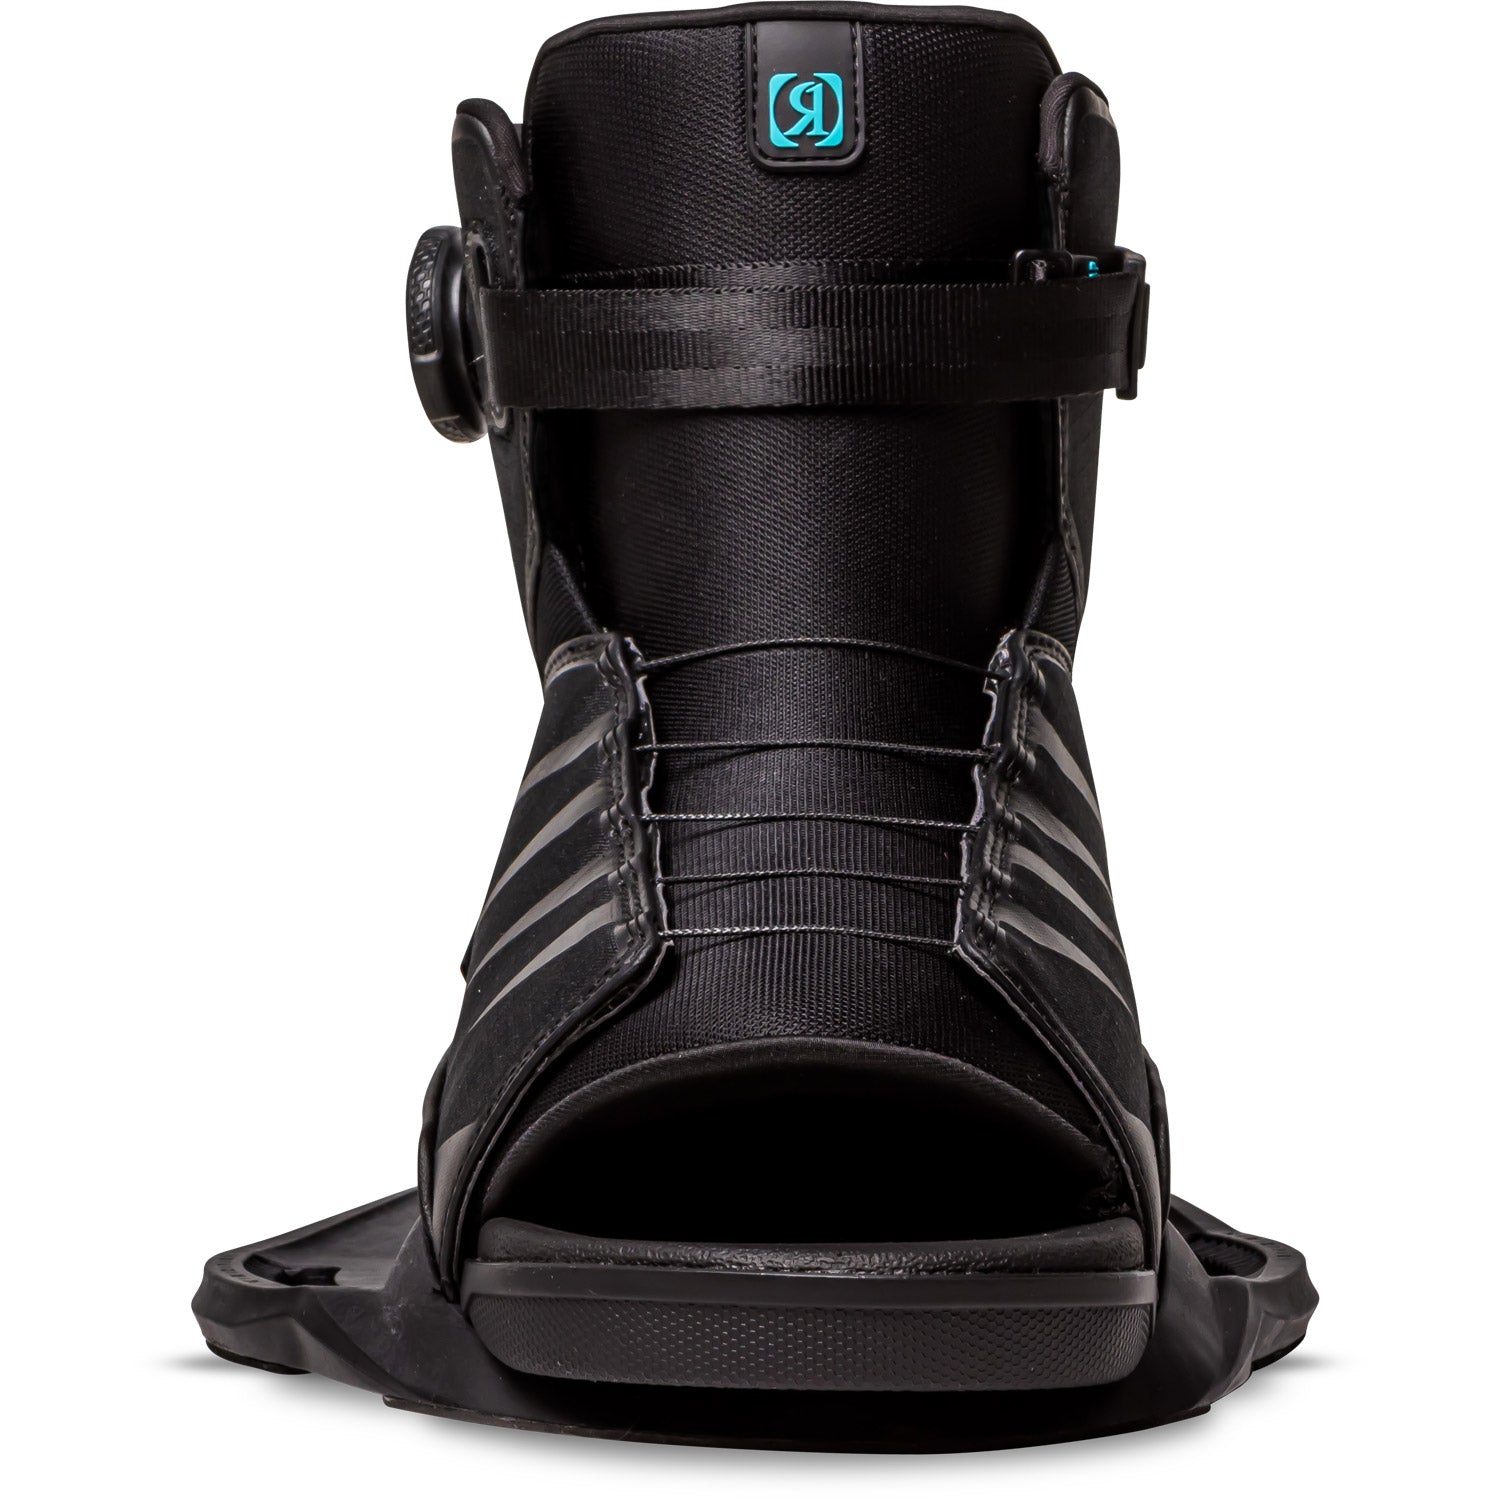 Anthem Boa Mens Wakeboard Boots